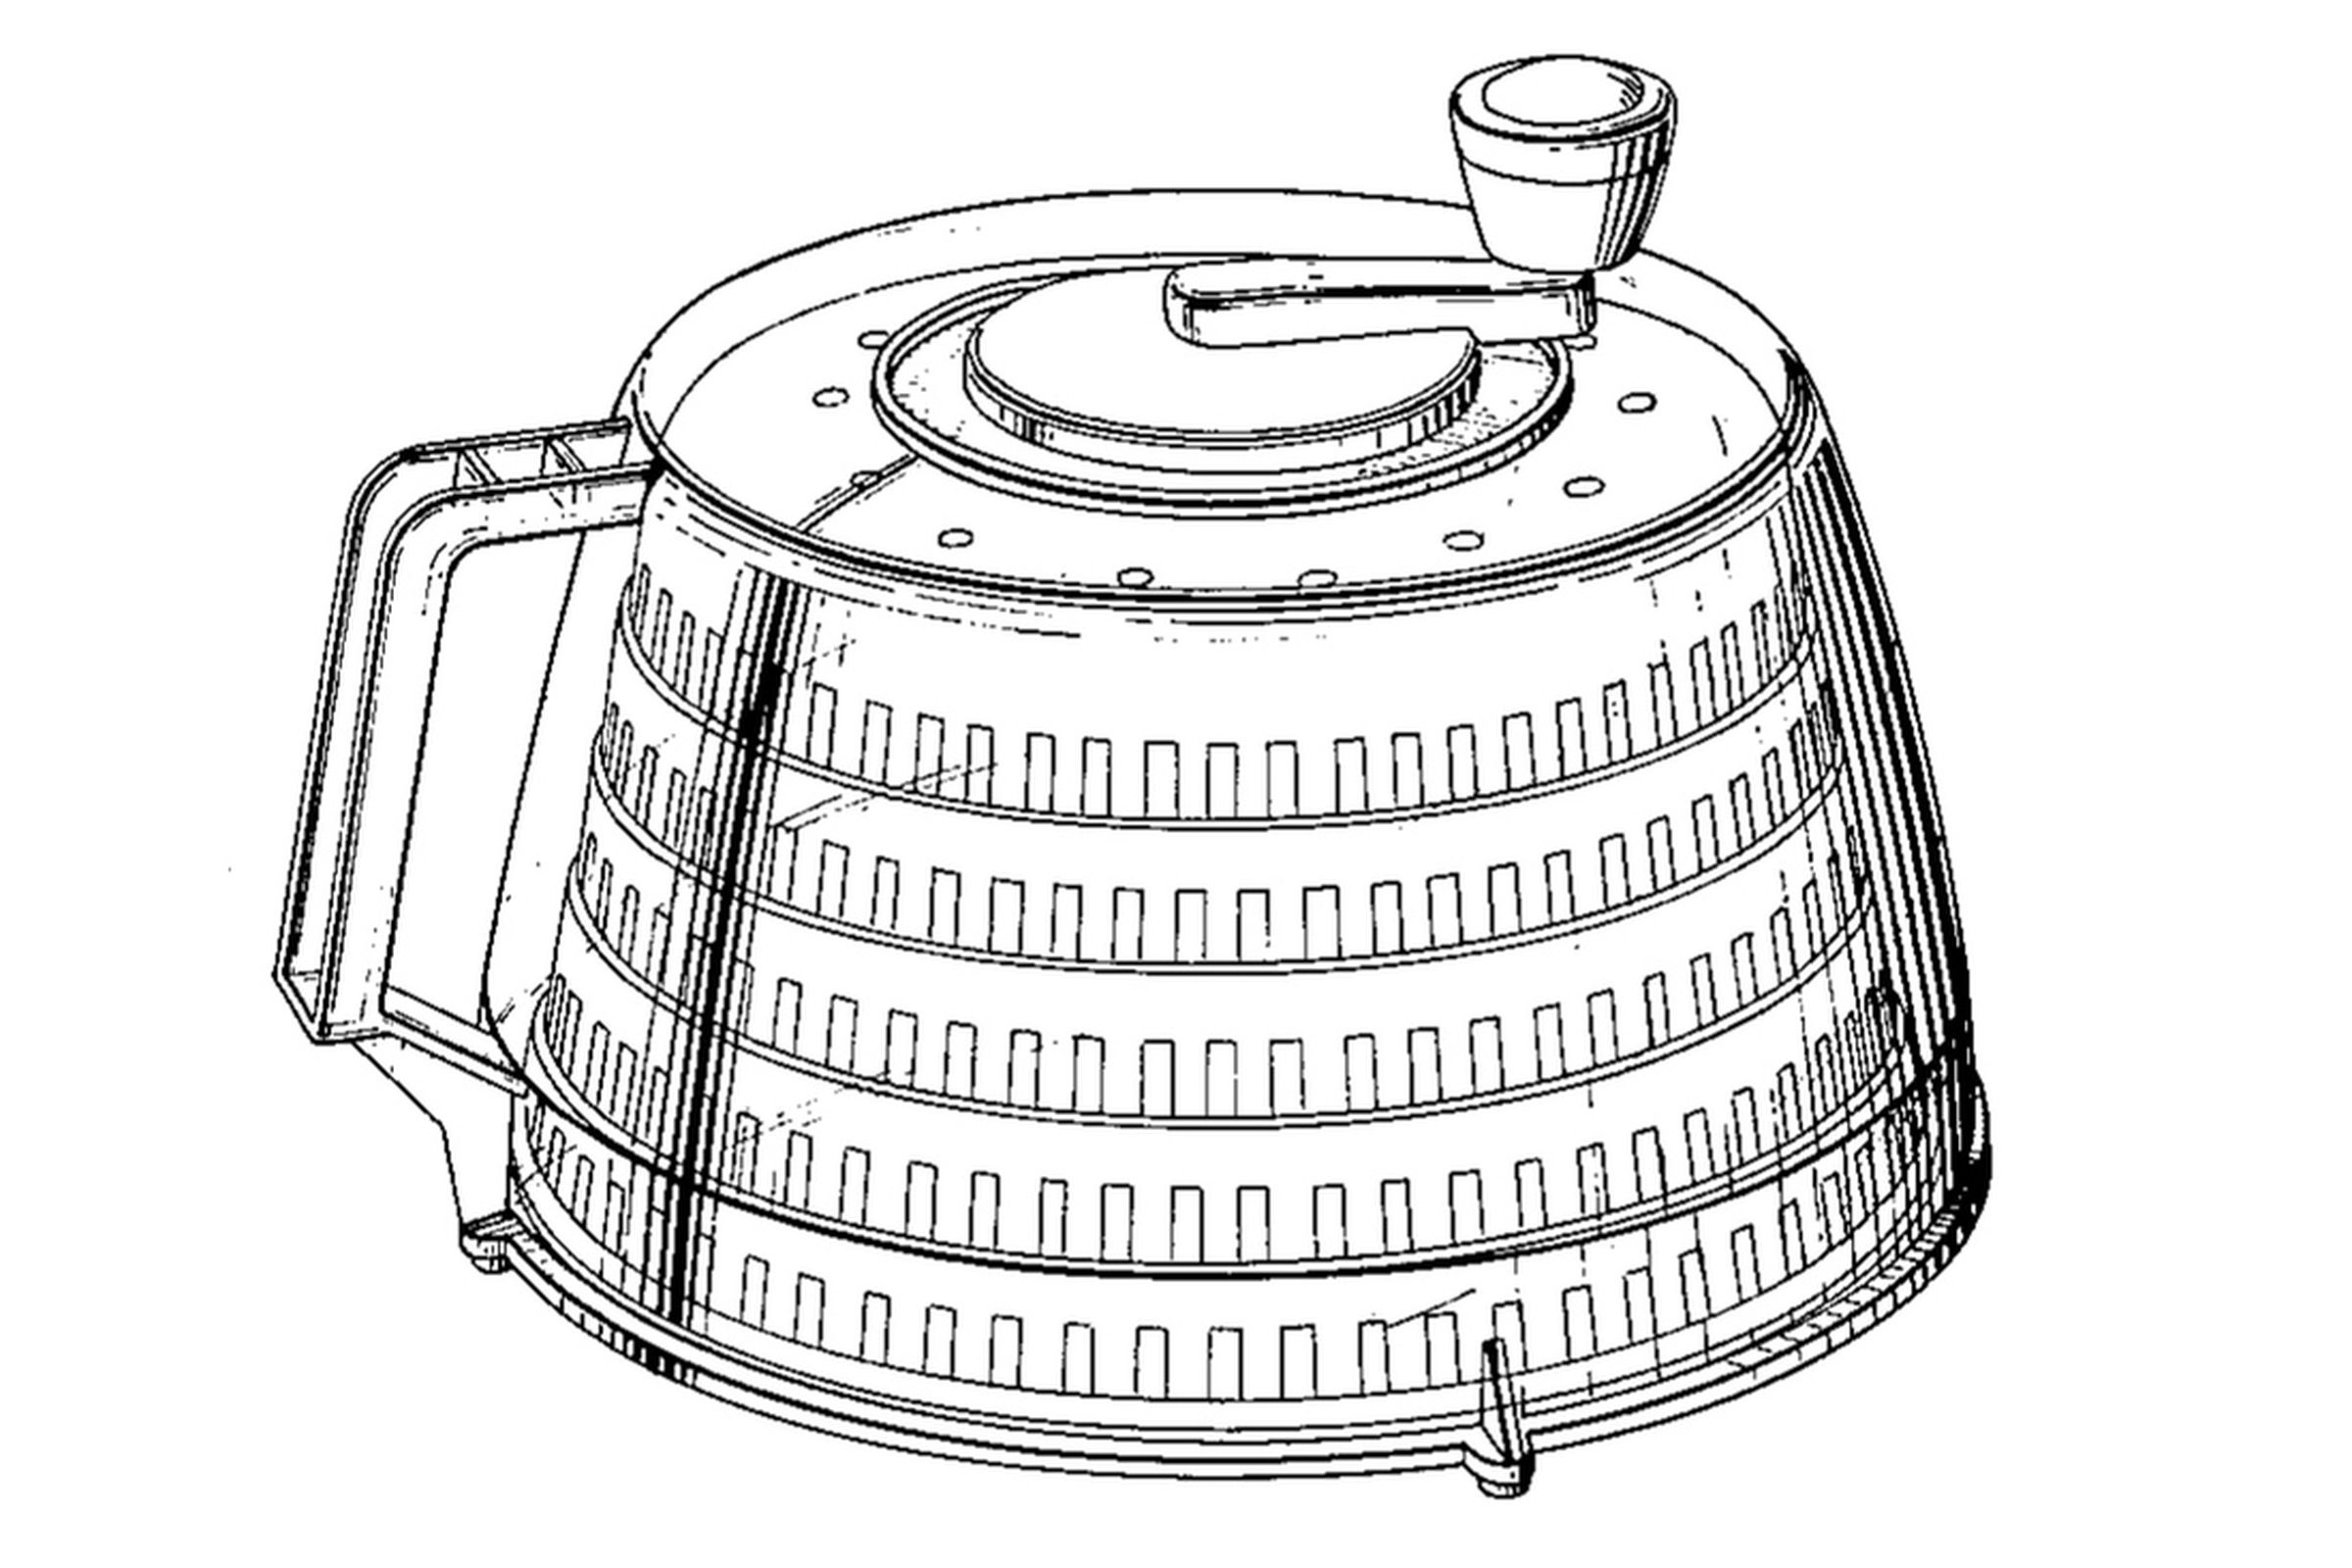 salad spinner (wikimedia commons)